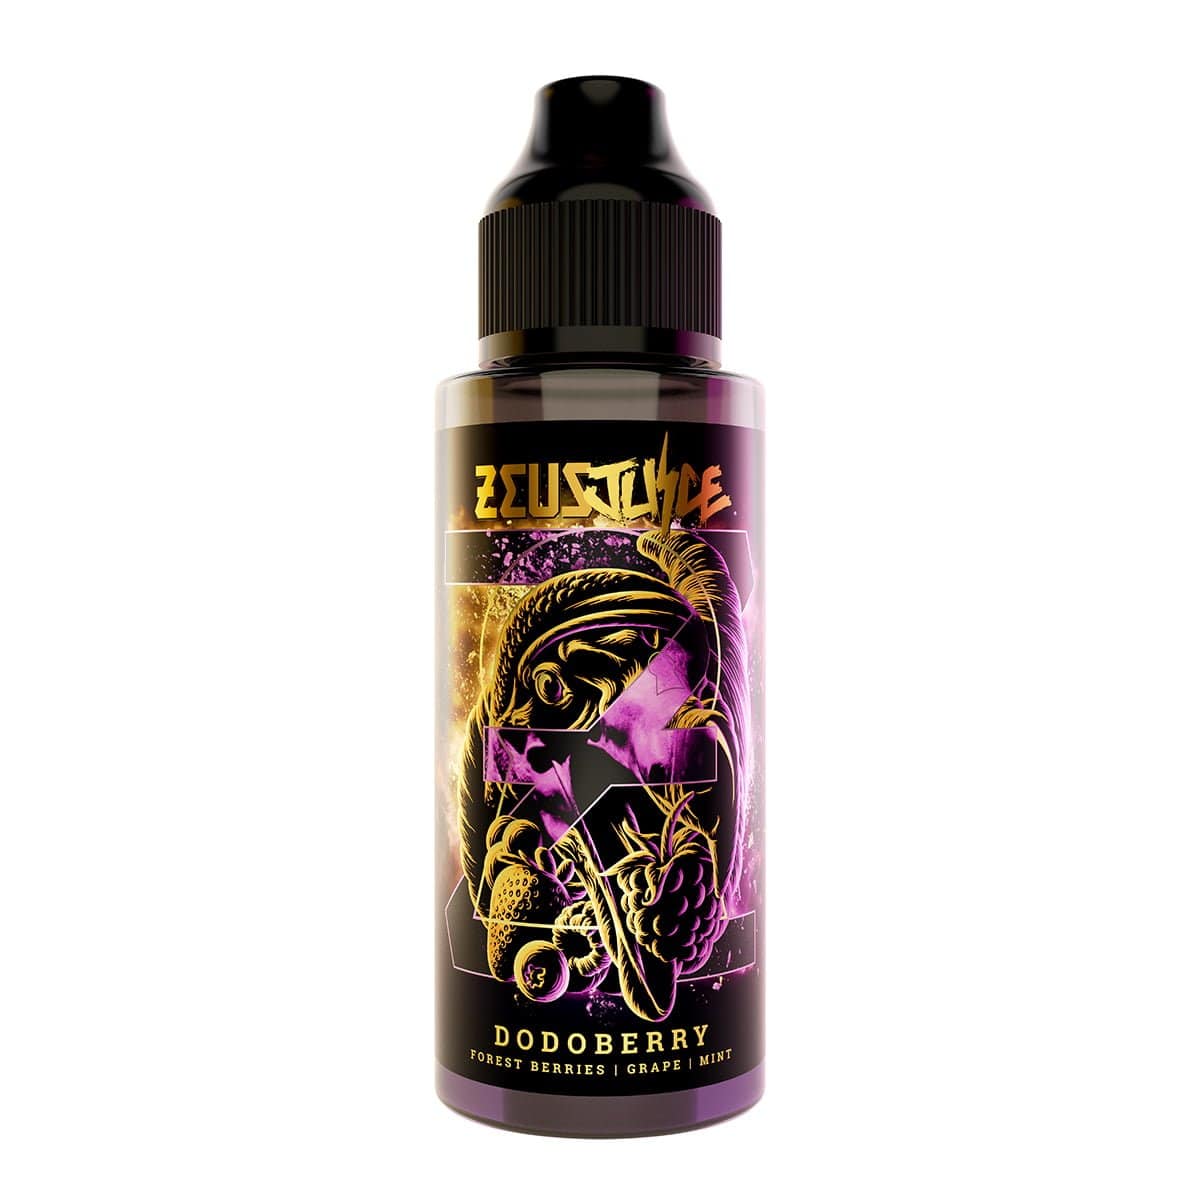 Load image into Gallery viewer, Dodoberry by Zeus Juice - 100ml Short Fill E-Liquid
